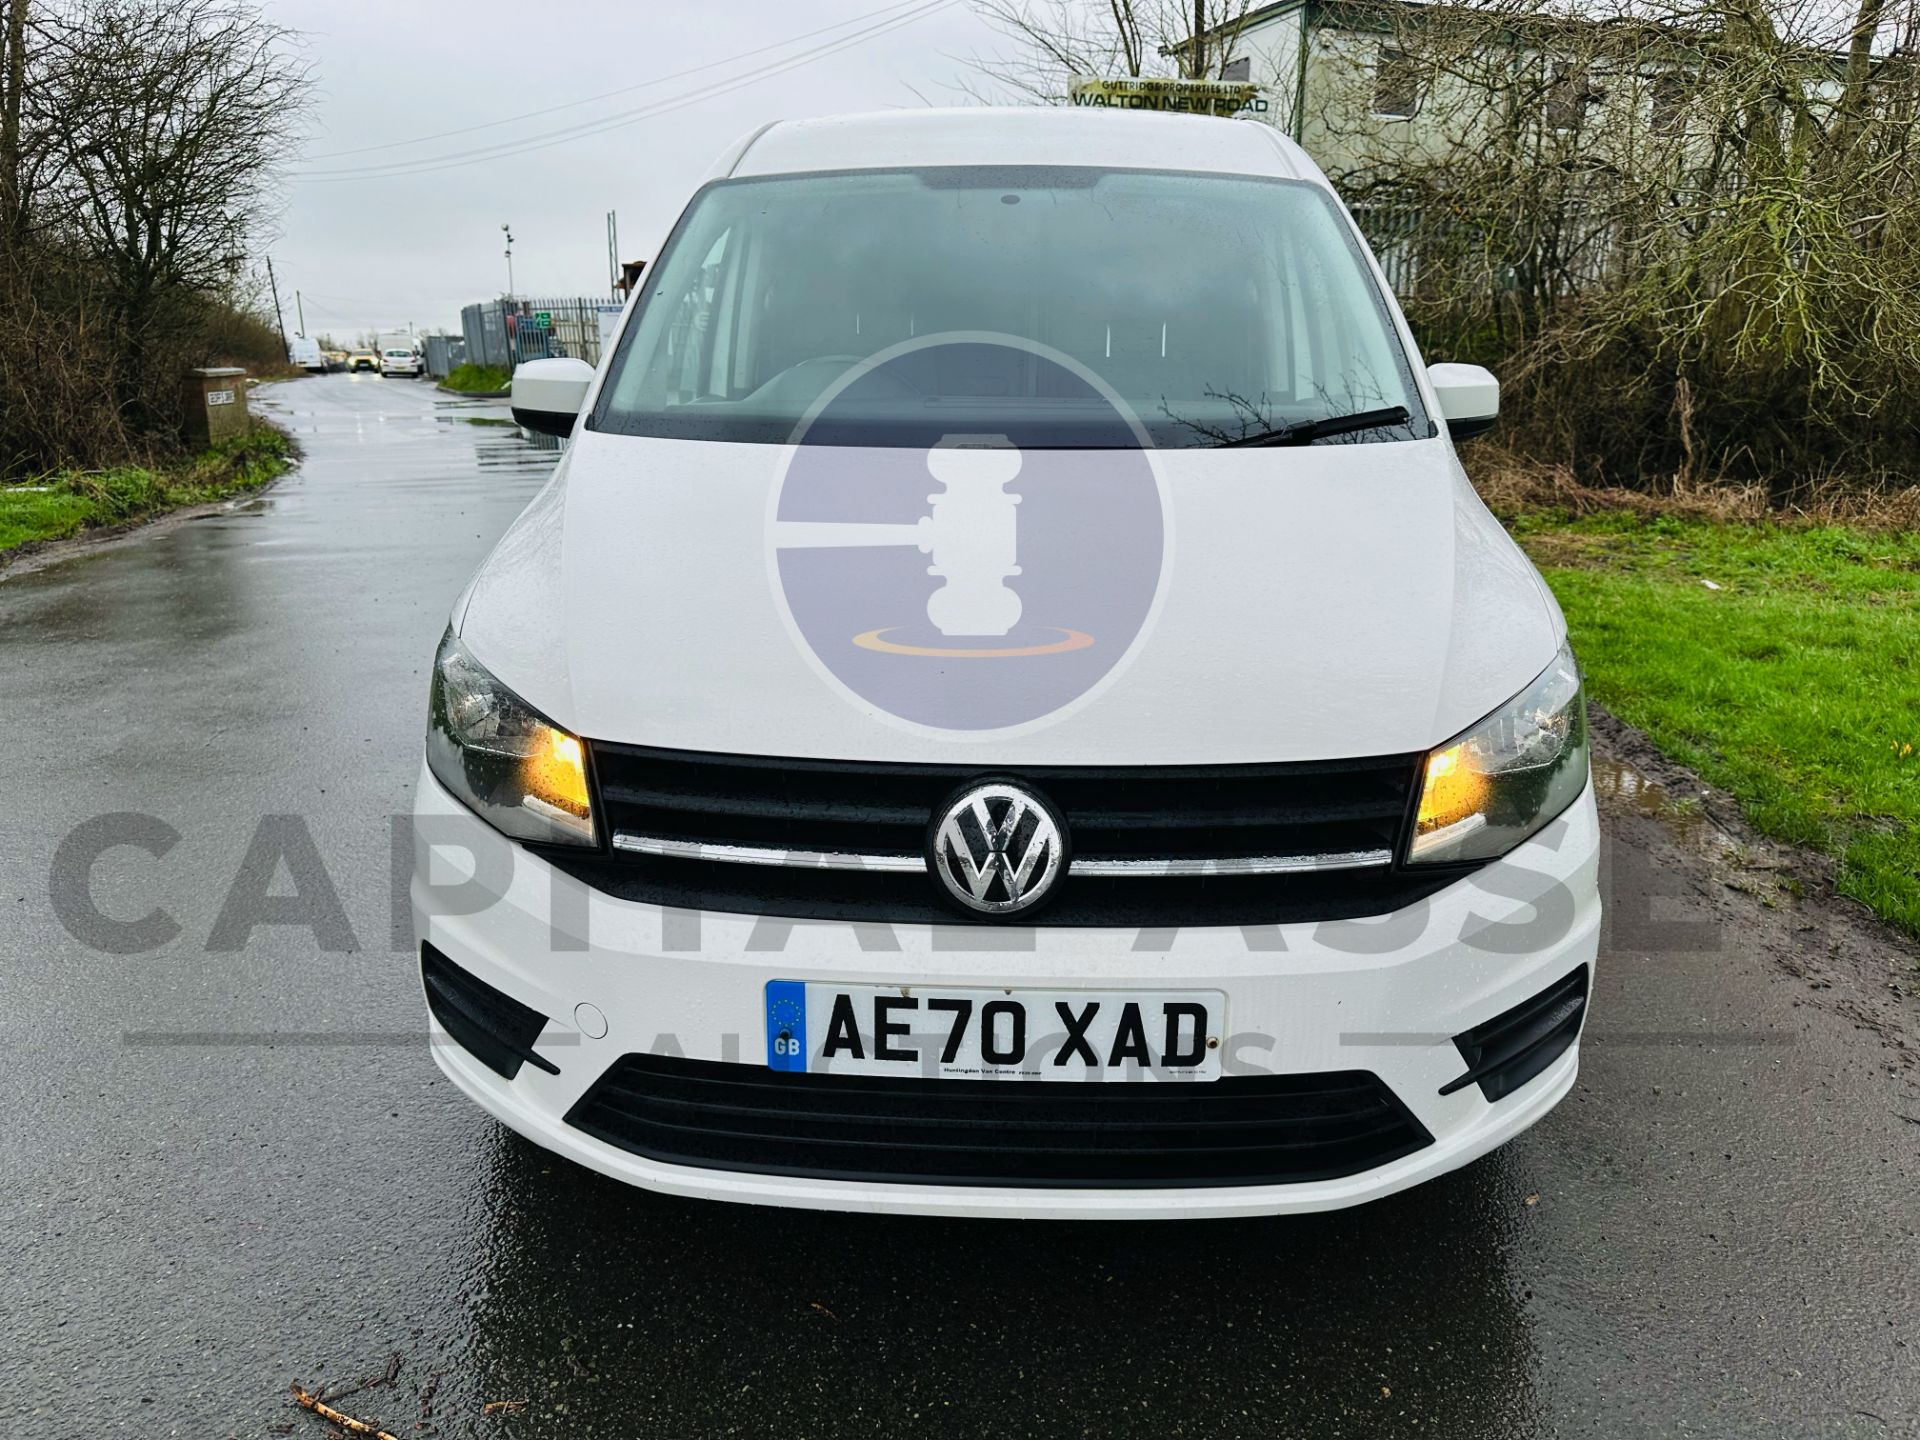 (ON SALE) VOLKSWAGEN CADDY 2.0TDI BMT TREND-LINE (2021 MODEL) MAXI / LWB-1 OWNER (AIR CON) EURO 6 - Image 3 of 29